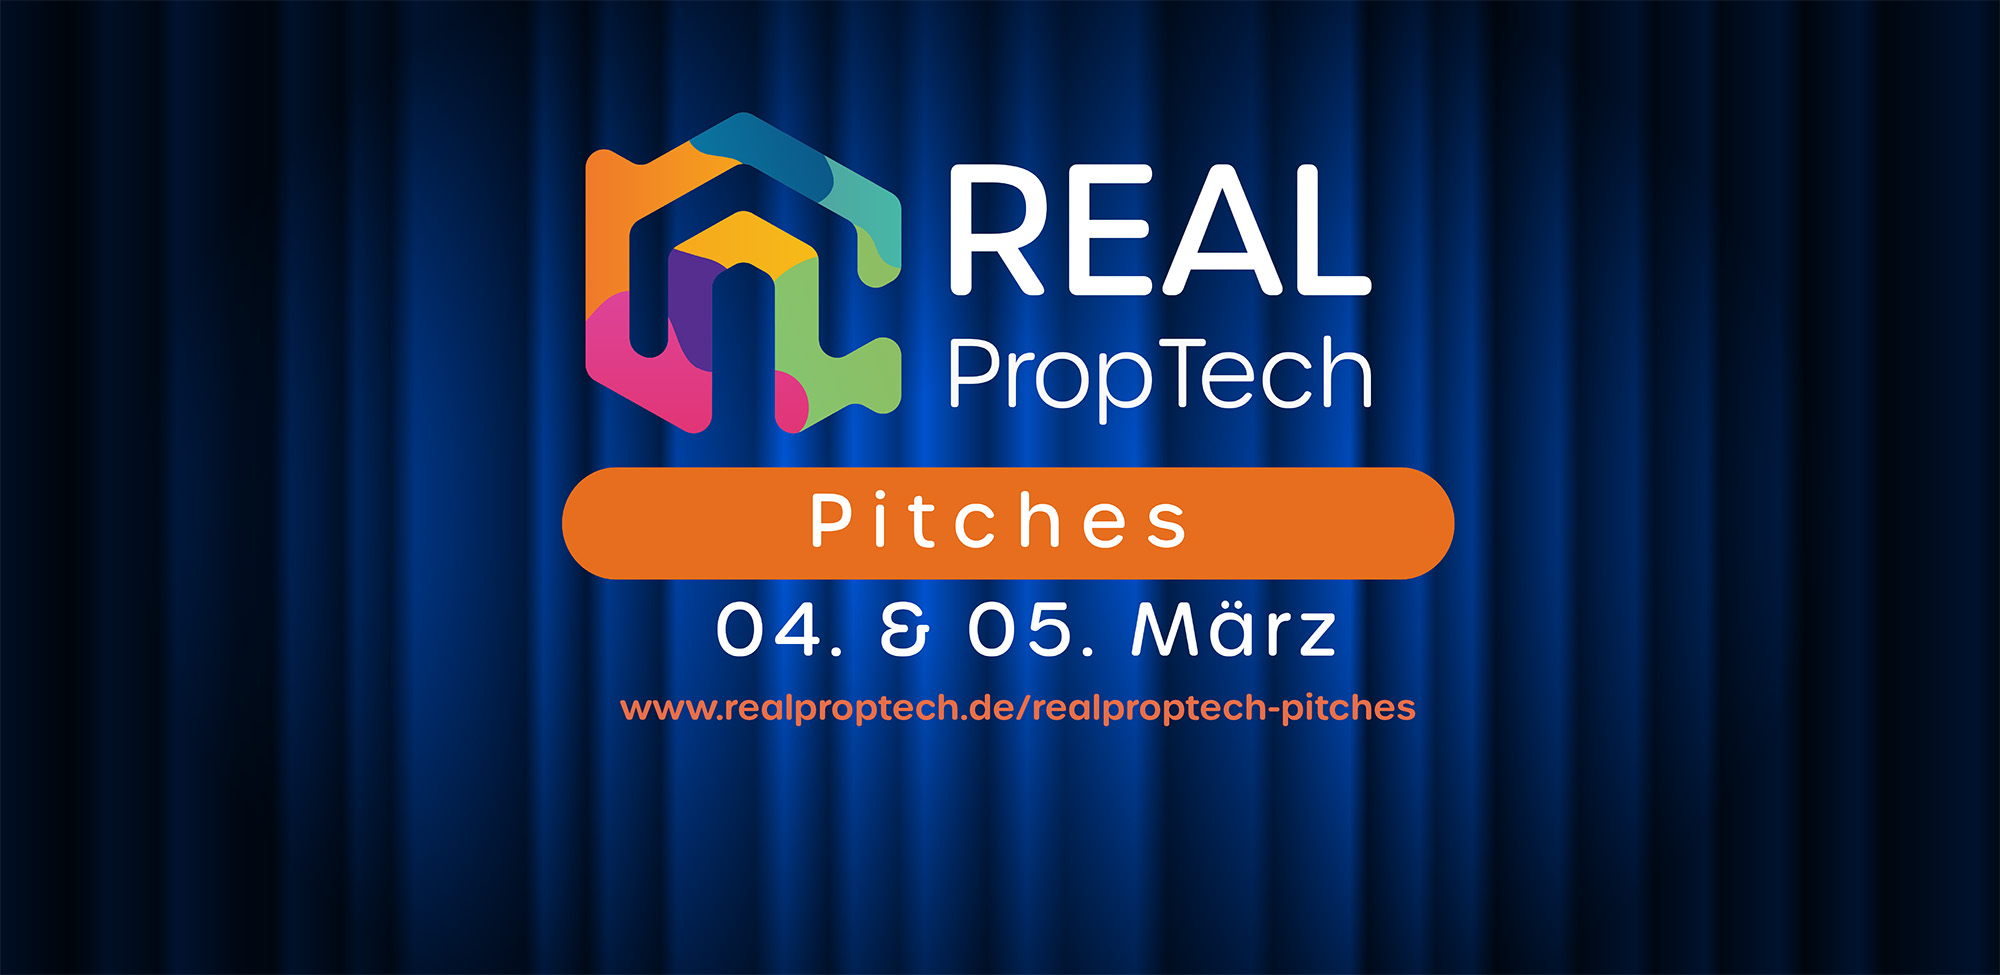 real proptech pitch 2021